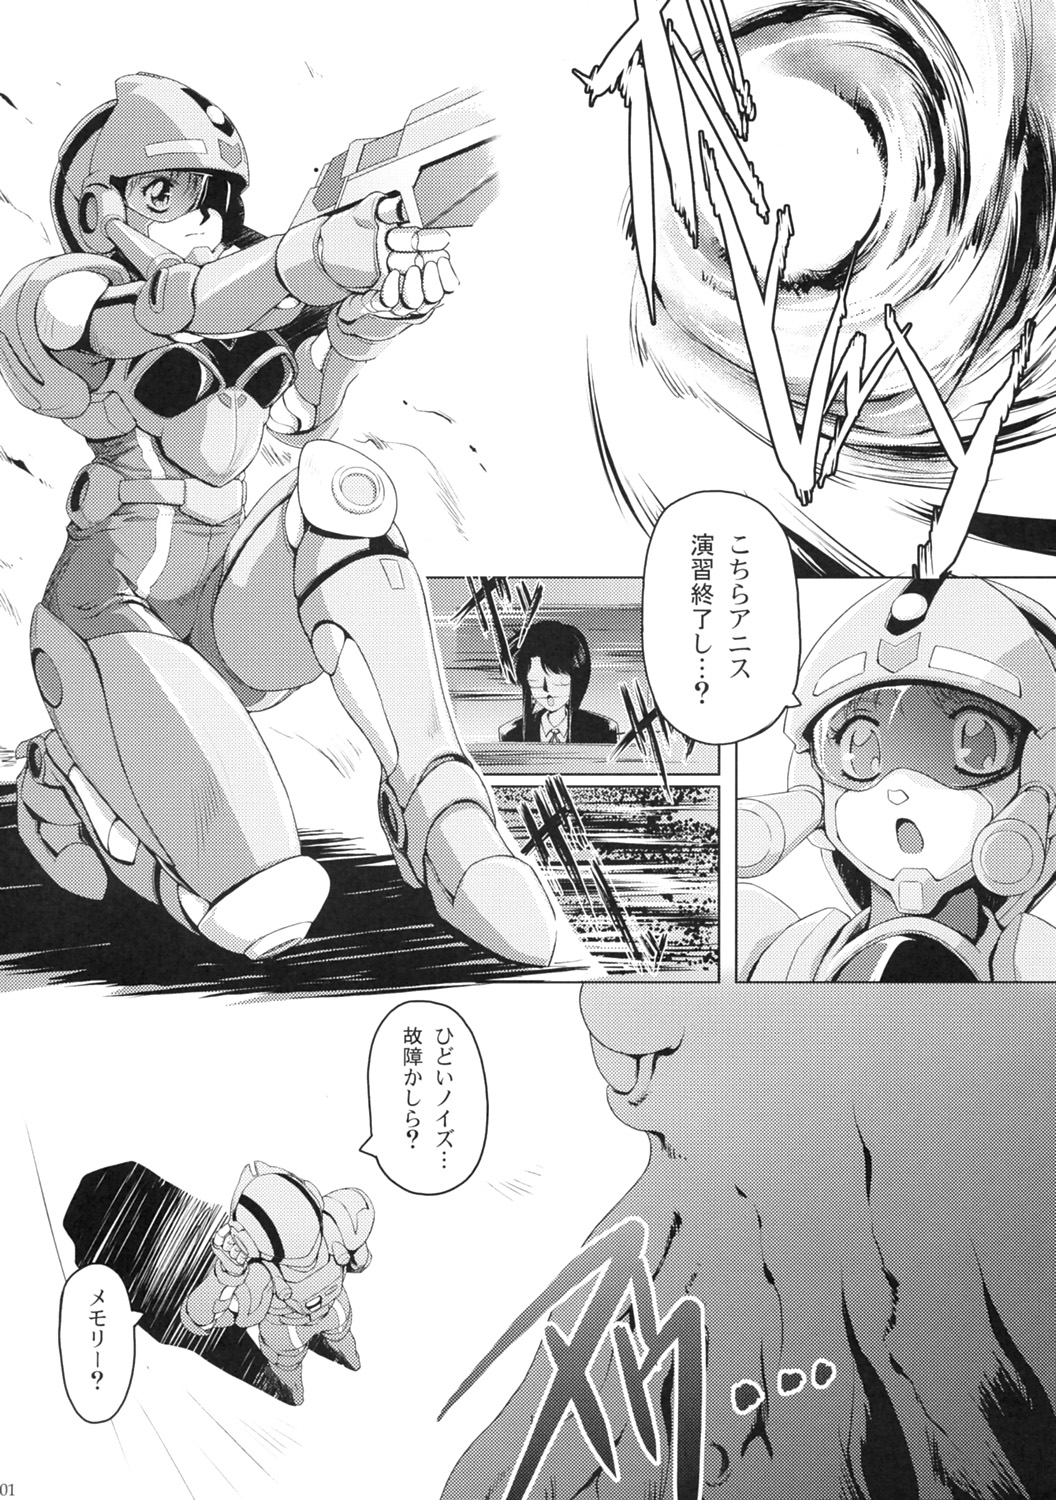 (C67) [Type-R (Rance)] Manga Onsoku no Are (Sonic Soldier Borgman) page 2 full